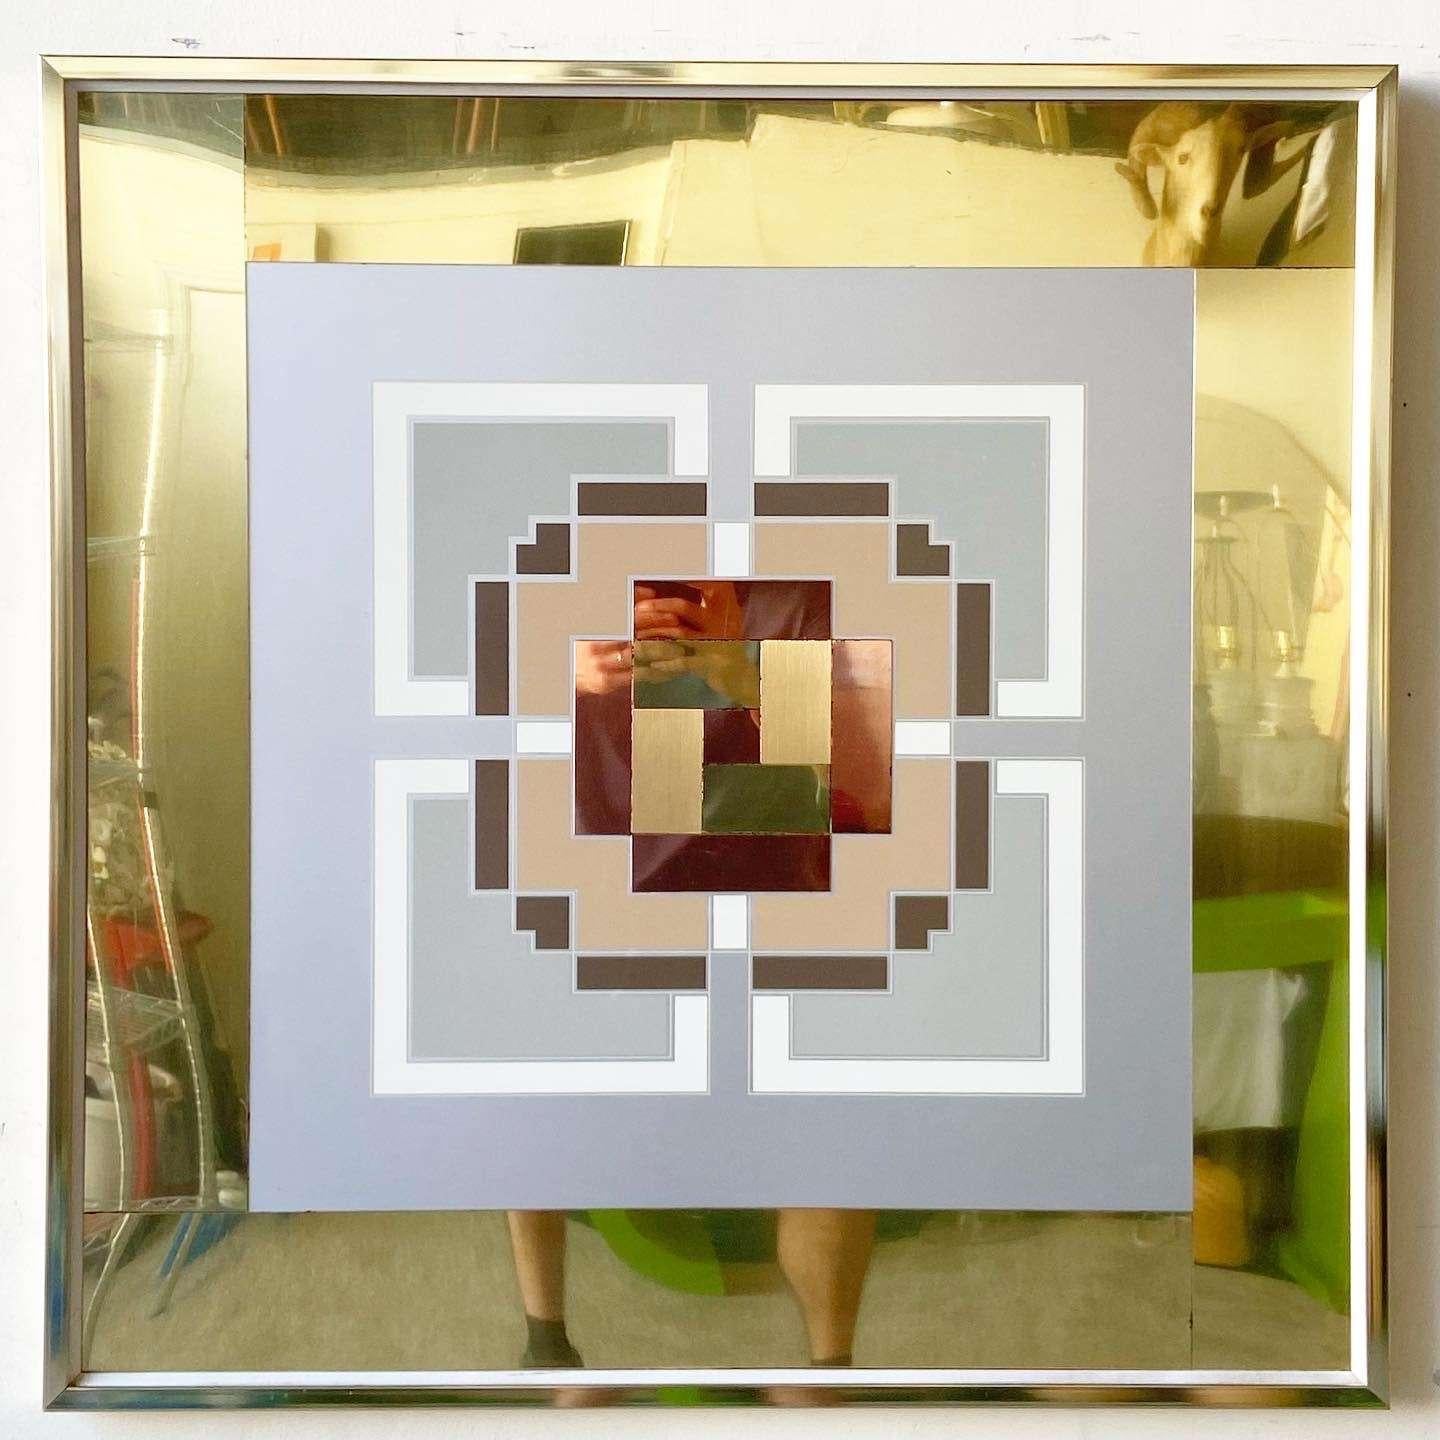 Exceptional mid century modern wall art by artist Greg Copeland. Features a fantastic display of squares and rectangles of gold, copper and silver tones.
